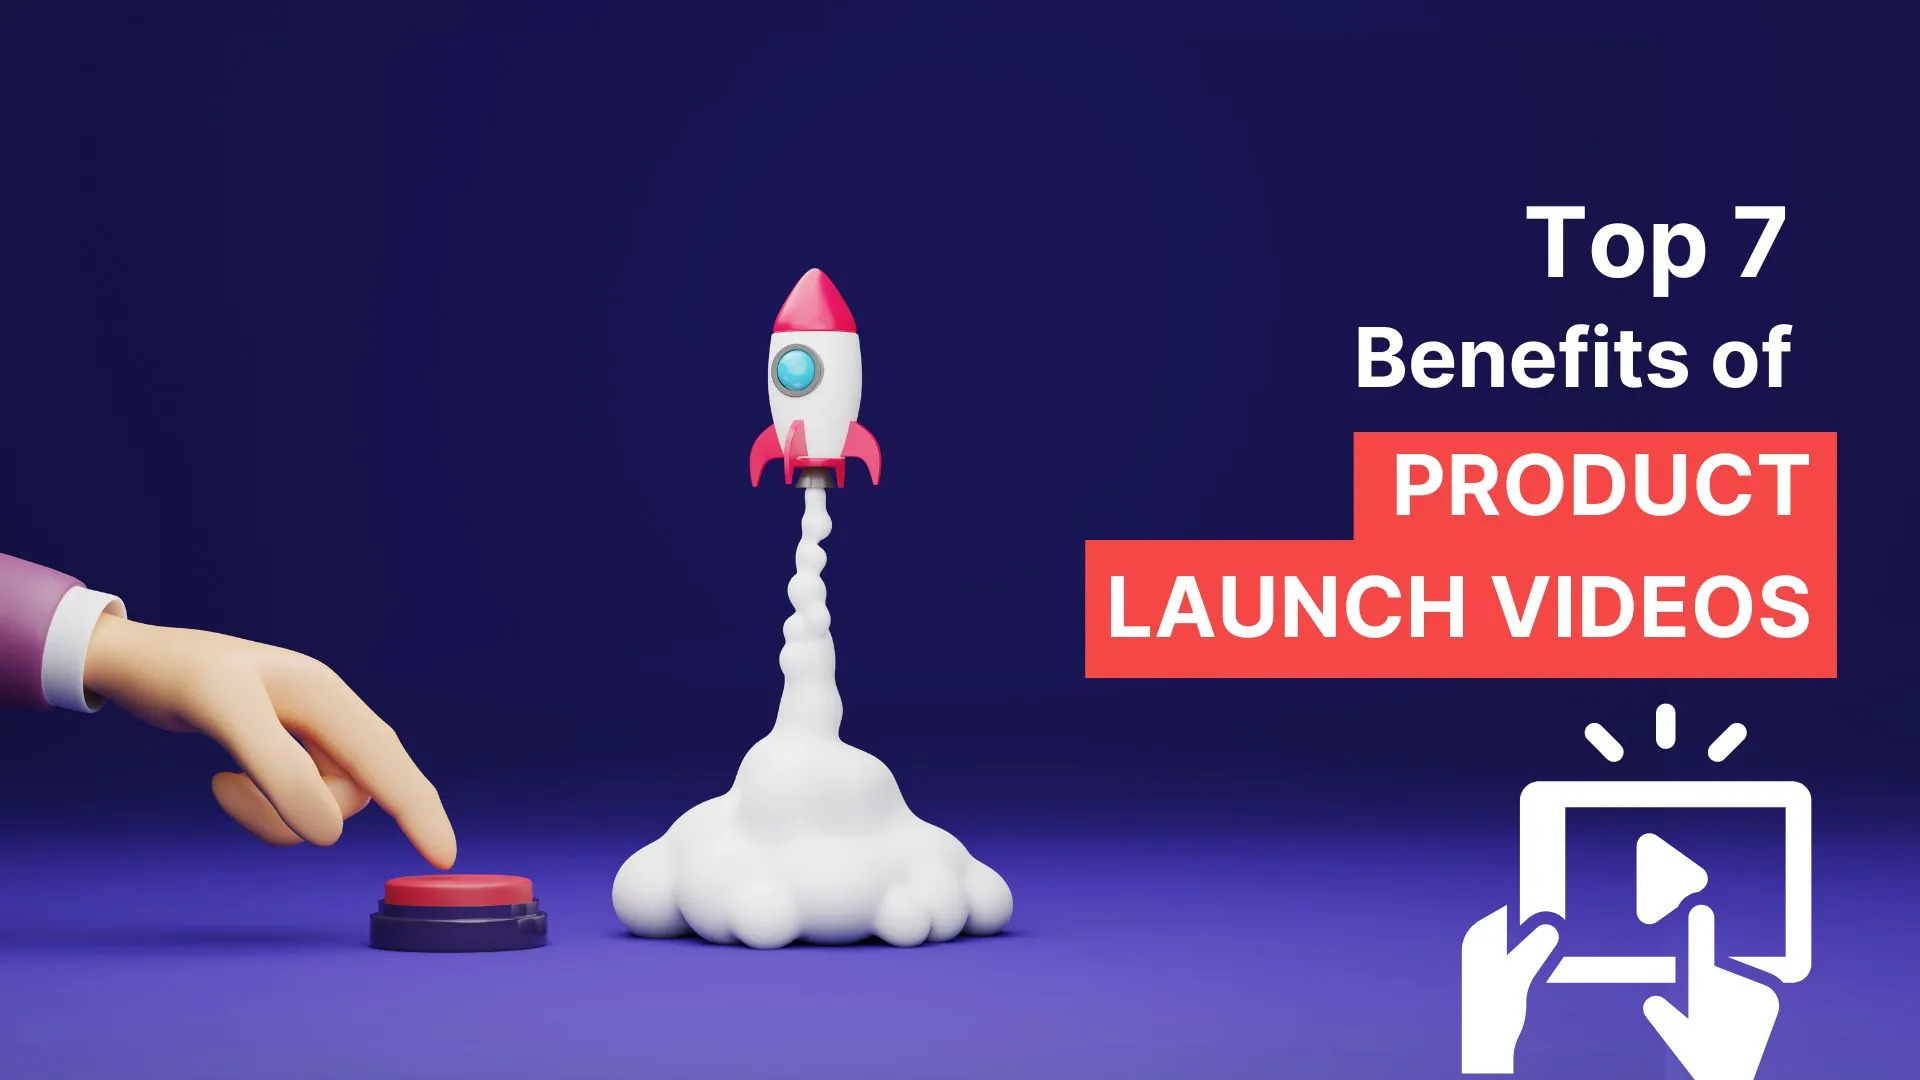 Product Launch Videos